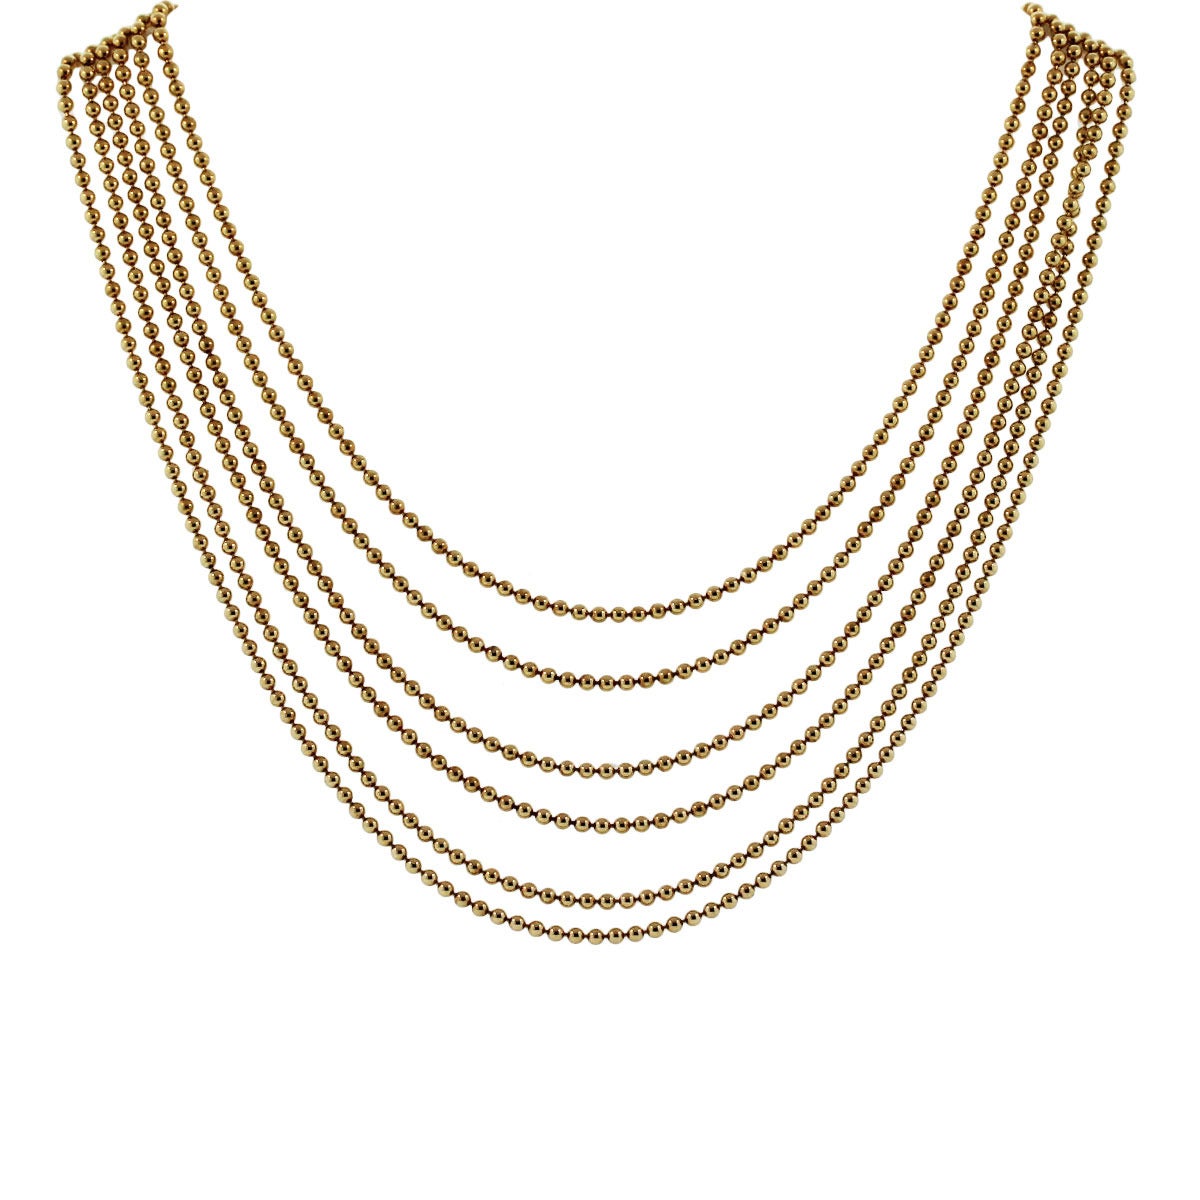 Brand: Cartier
Style: 18k Yellow Gold Six Strand Necklace
Material: 18k Yellow Gold
Total Weight: 39dwt (60.6g)
Necklace Length: Chain is 15''
Clasp: Cartier double hook and eye clasp
Comes with: Raymond Lee Jewelers presentation box!
SKU: